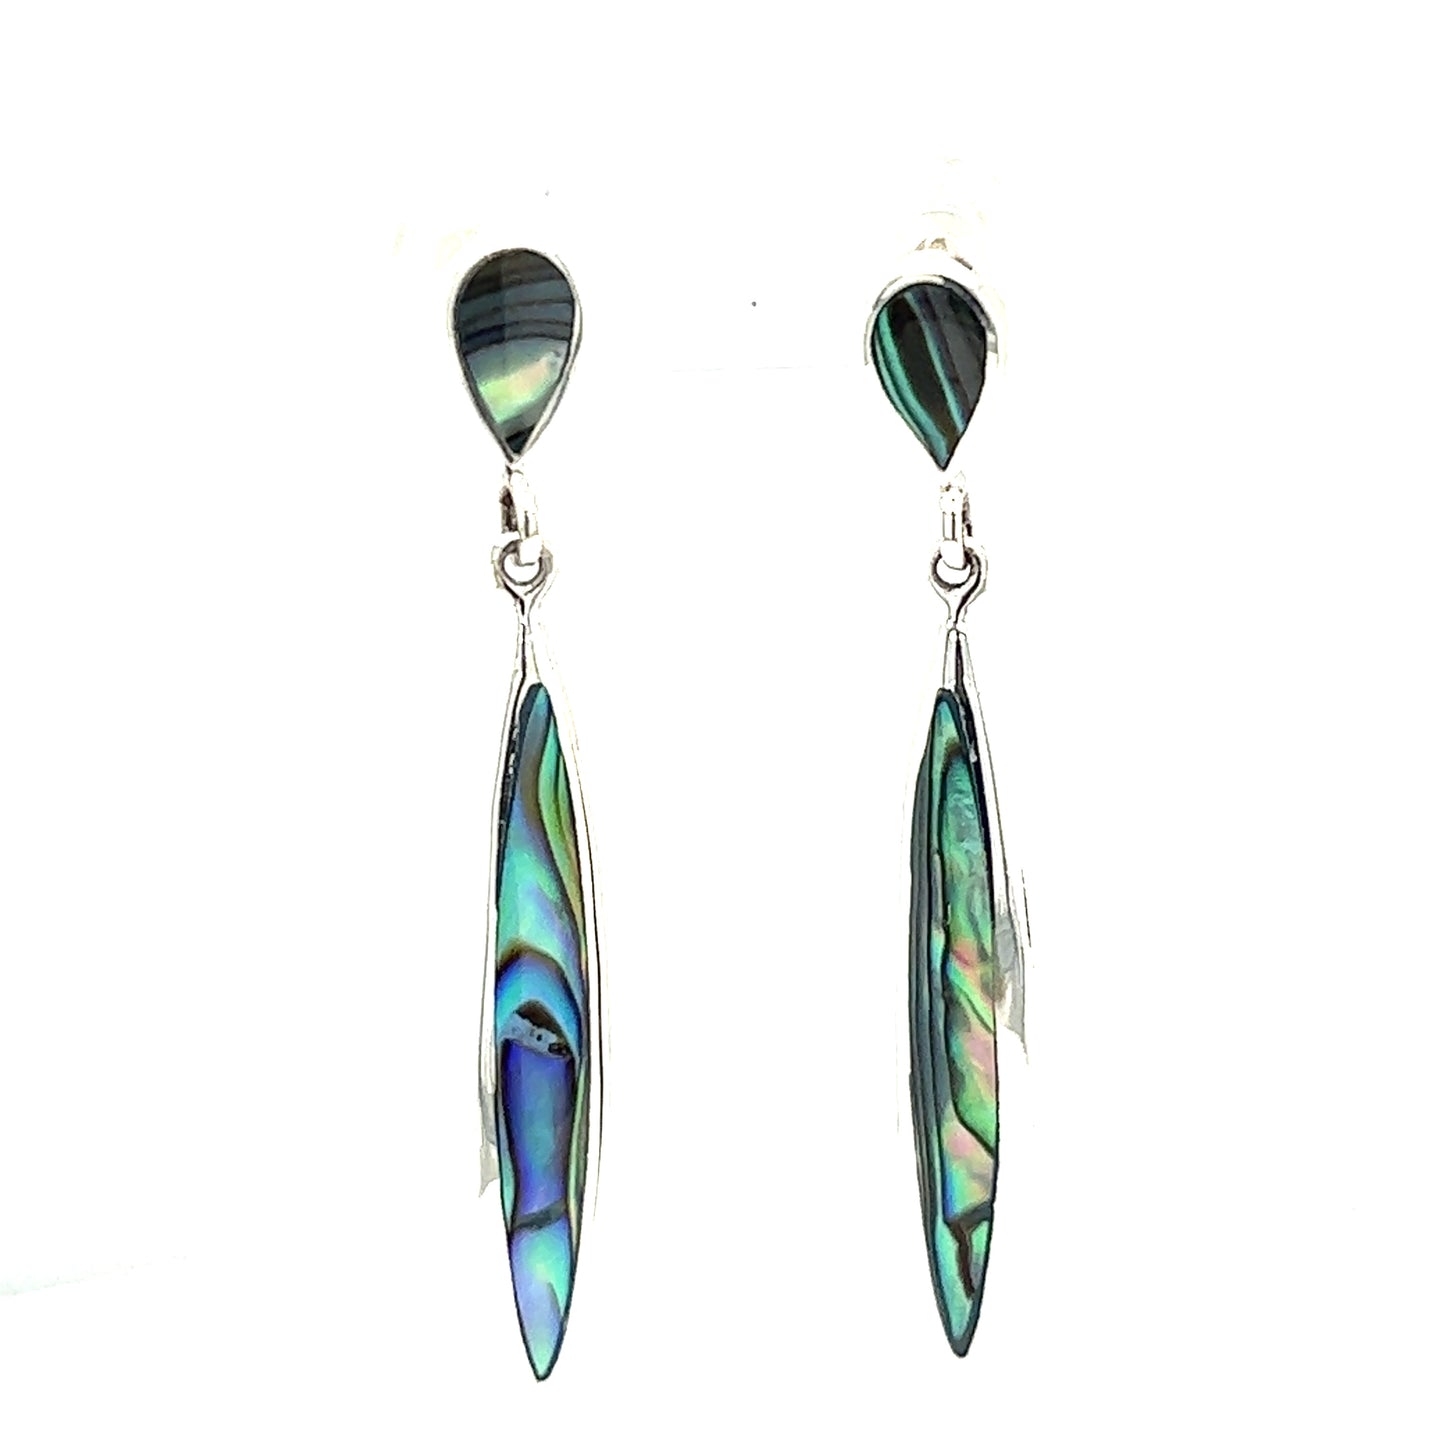 A pair of Super Silver Long Abalone Earrings with Post showcasing ocean's splendor on a white background, highlighting their natural beauty.